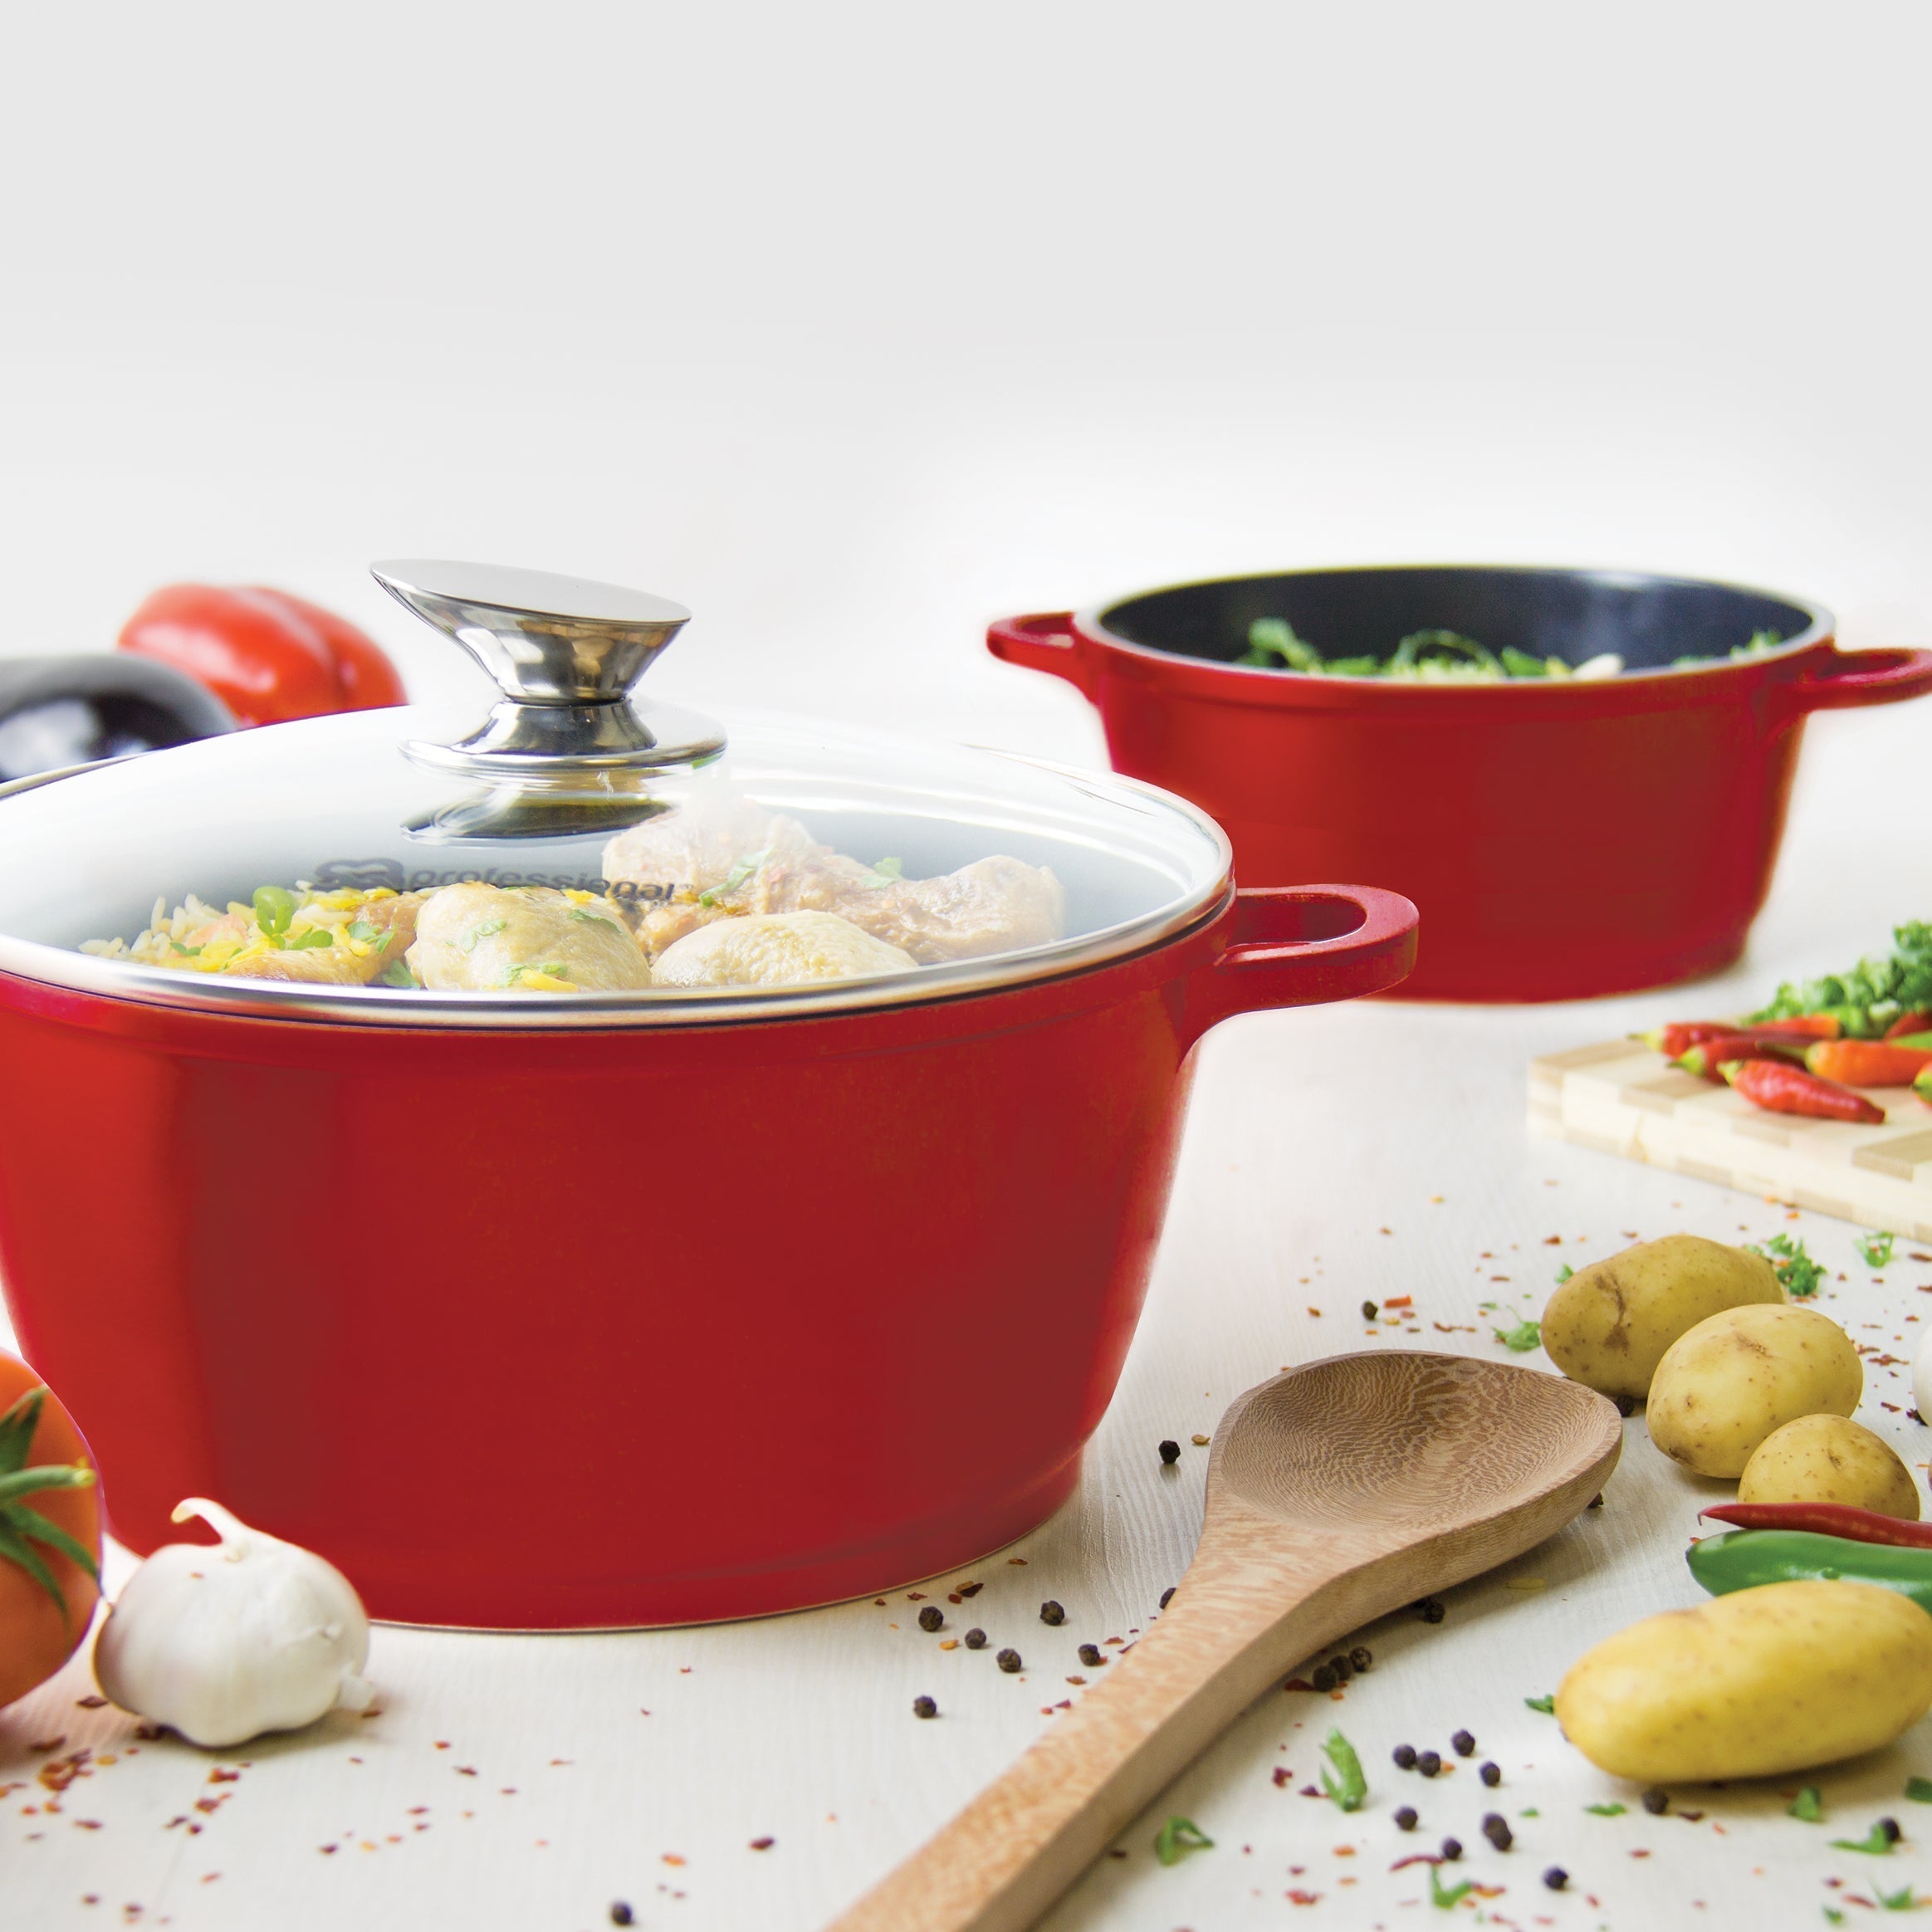 Die Cast Stockpot With Induction - NEA - Red - 30cm